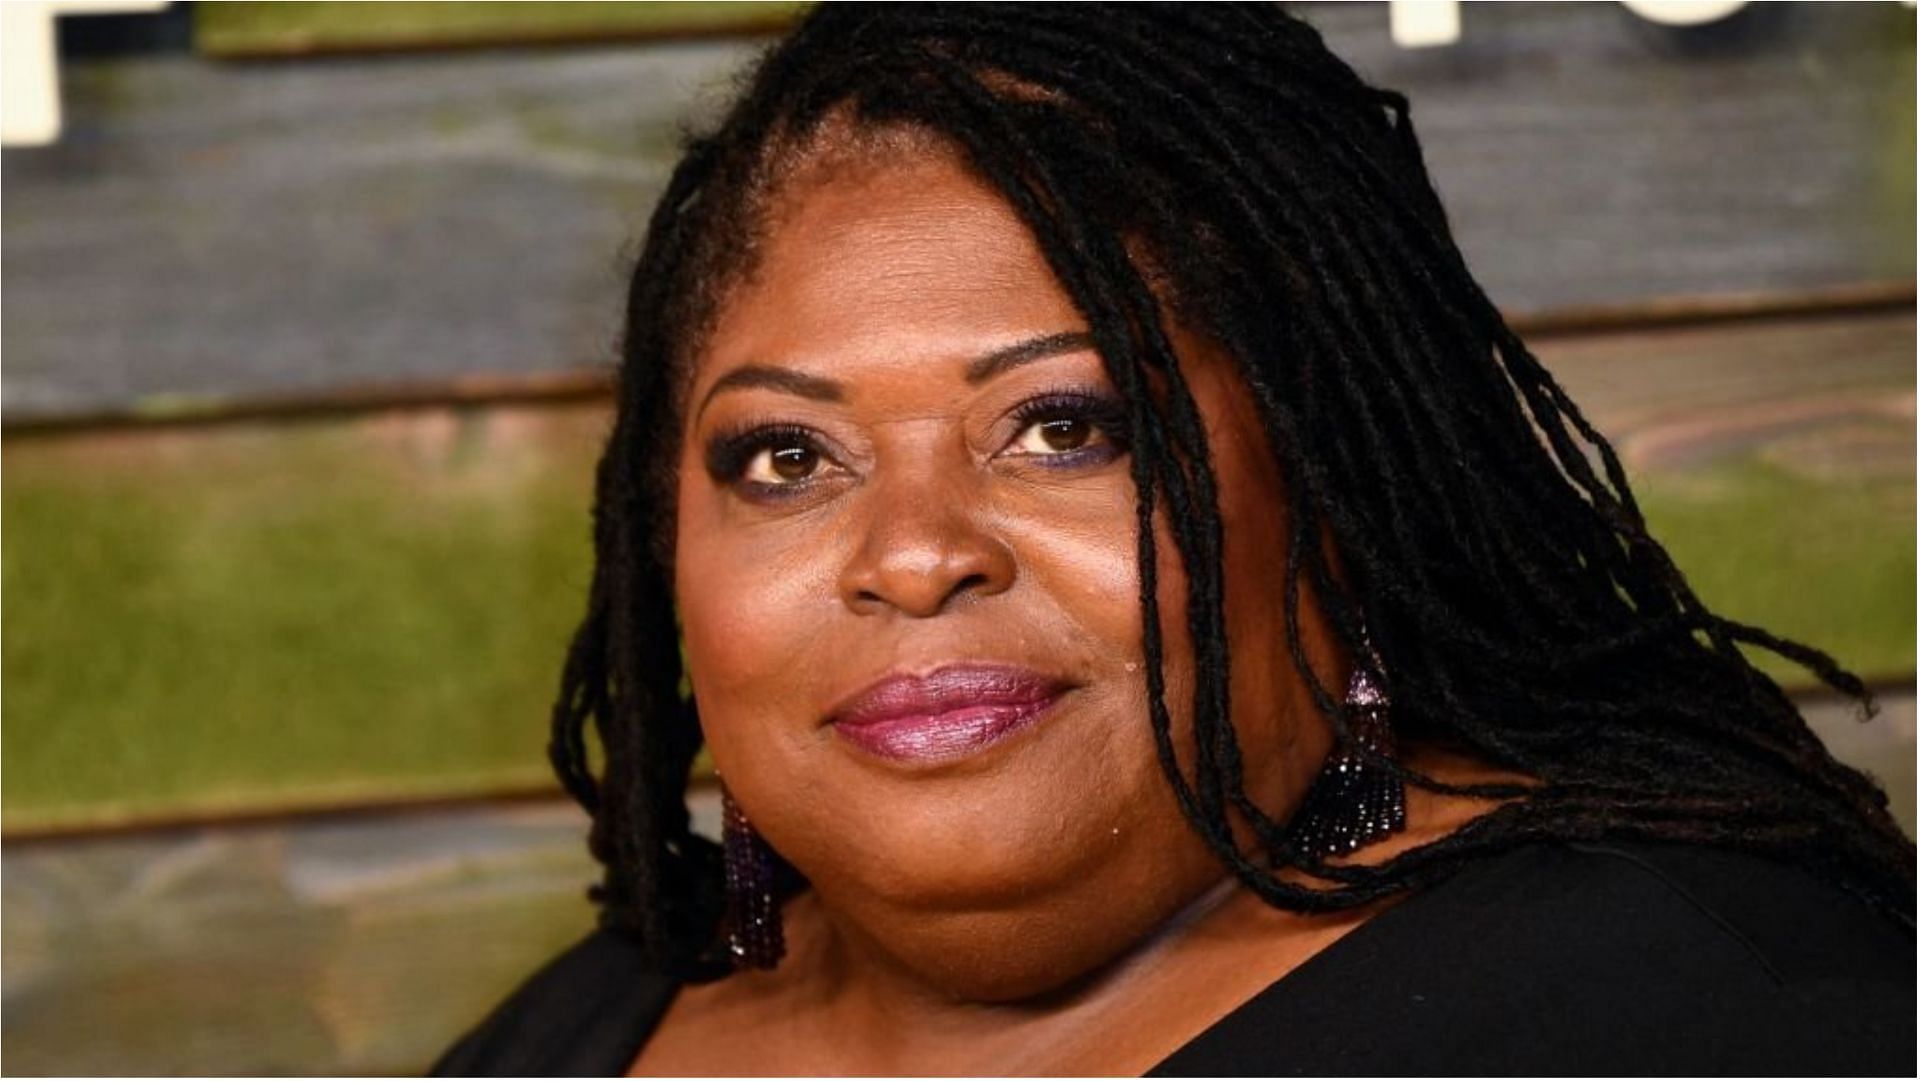 Sonya Eddy recently died at the age of 55 (Image via Patrick T. Fallon/Getty Images)